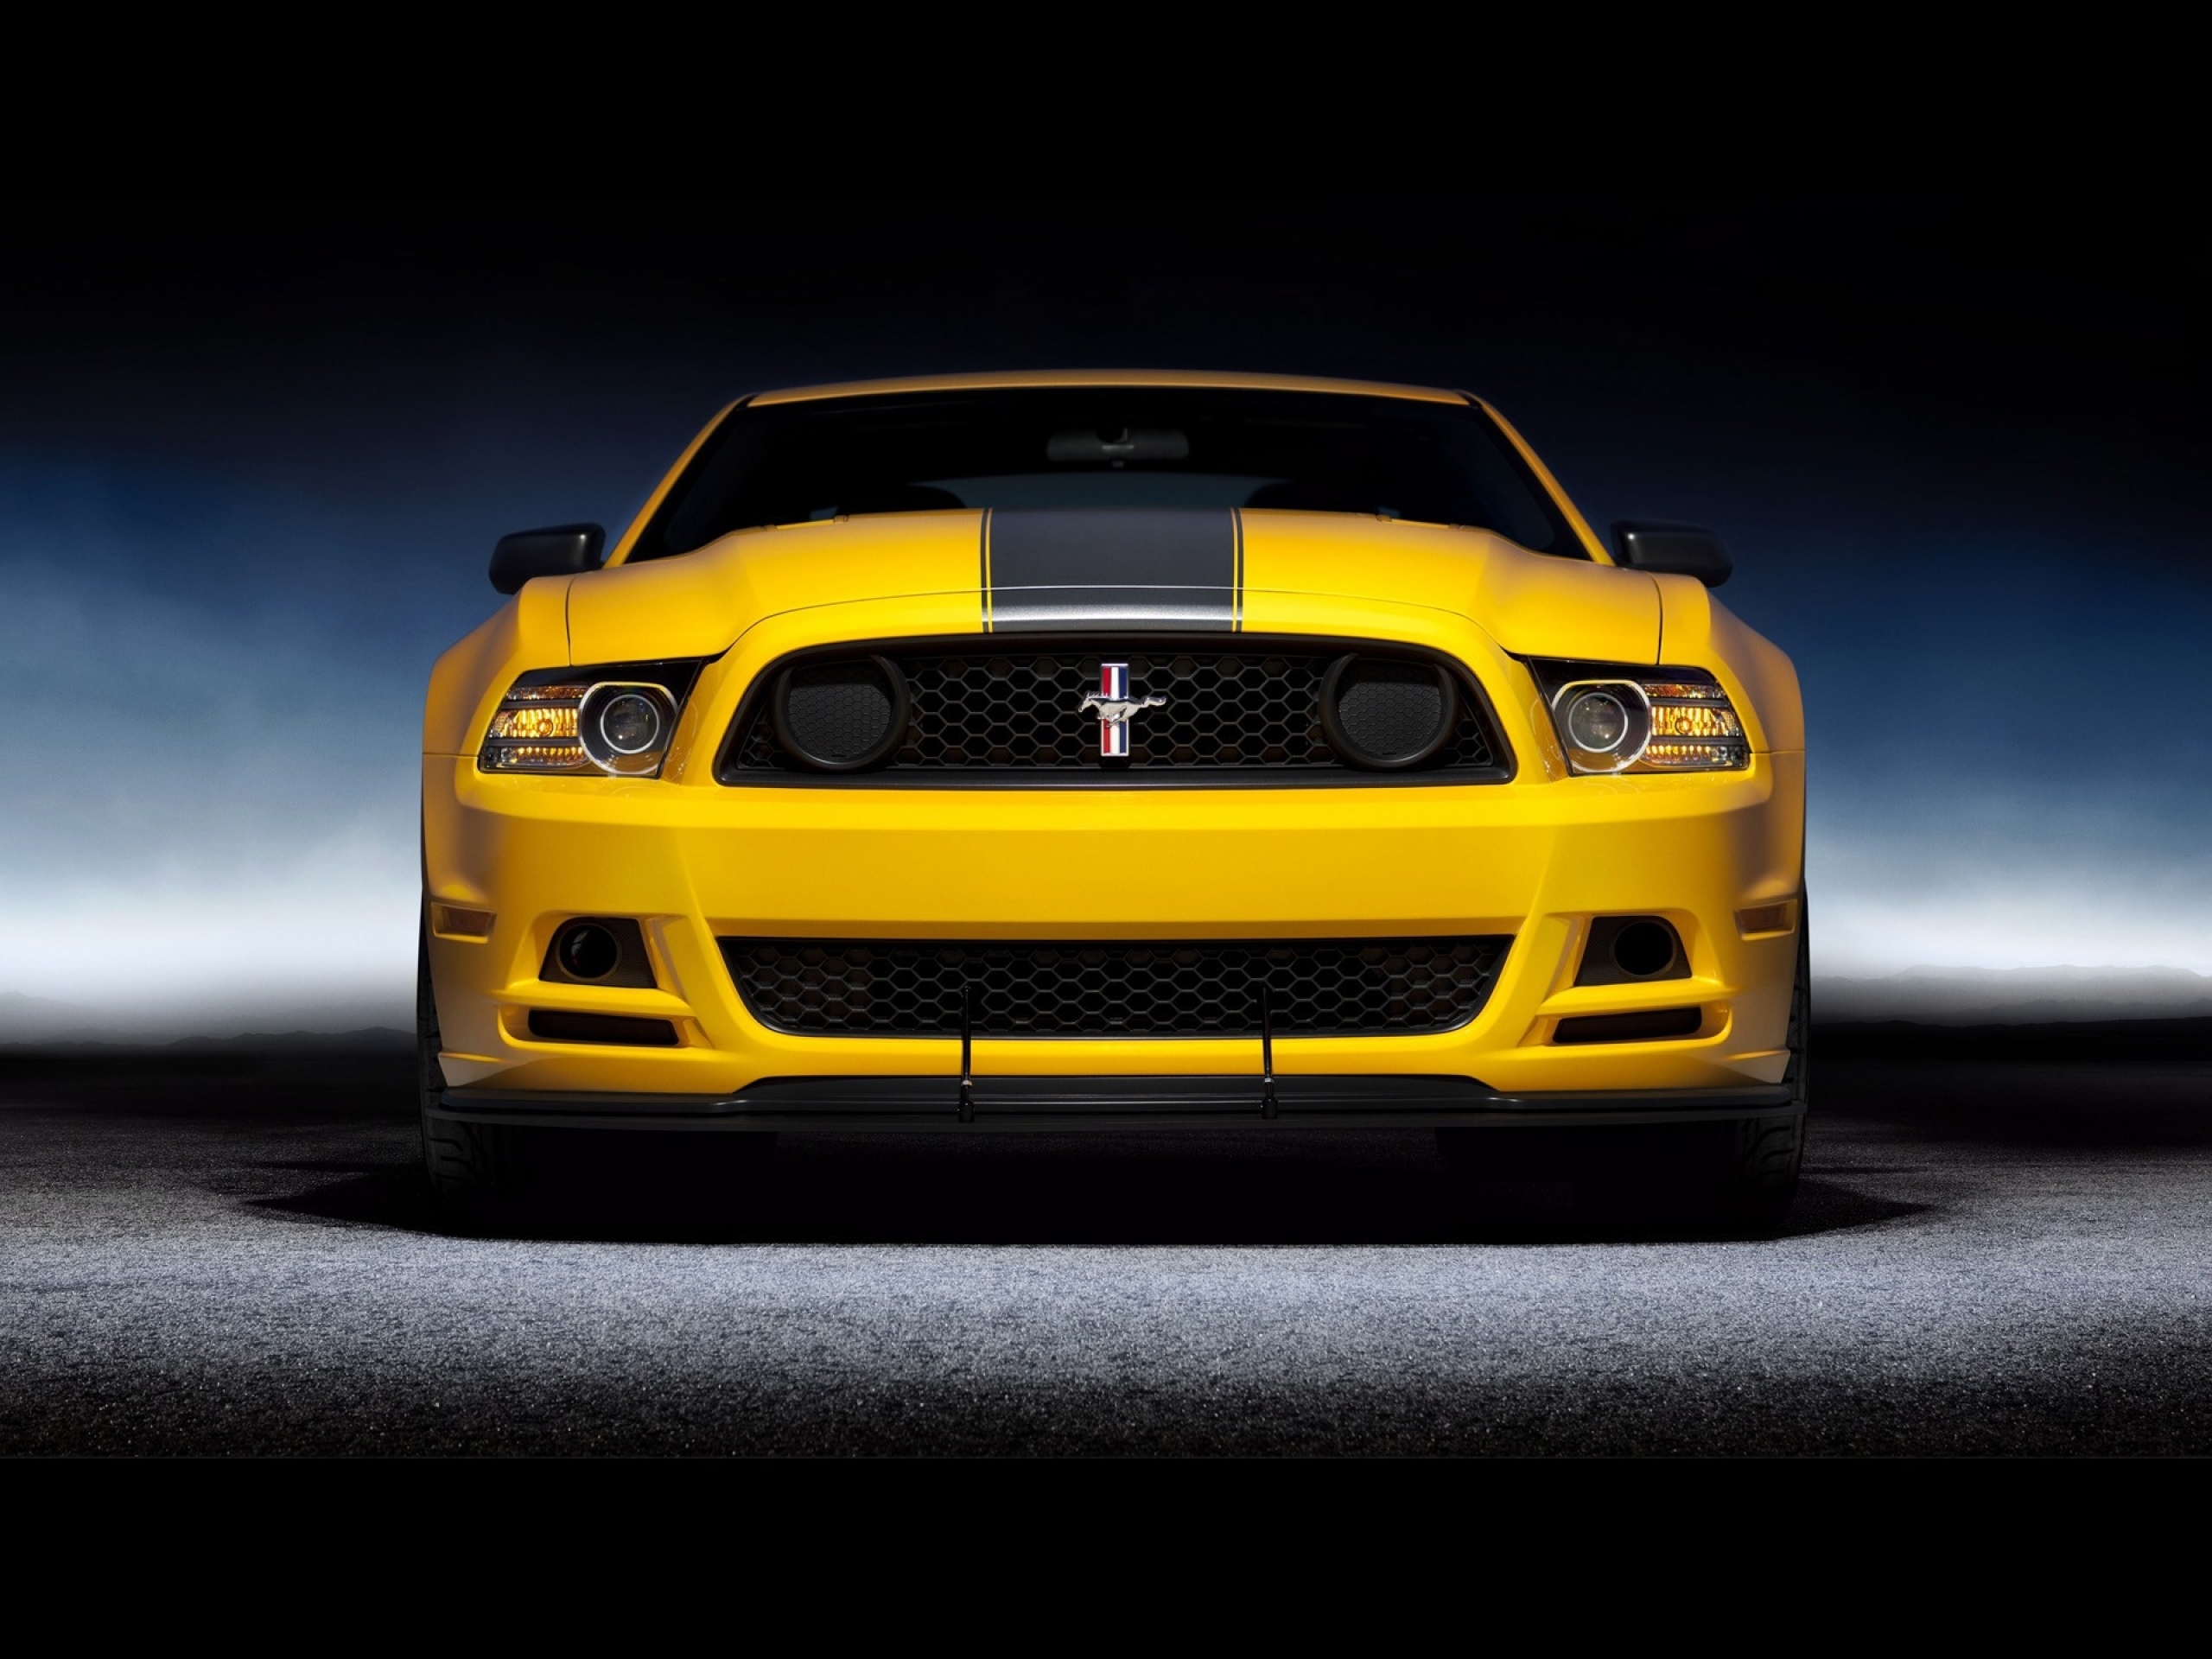 ford mustang, muscle car, ford mustang boss, vehicles, ford mustang boss 302, car, ford, yellow car